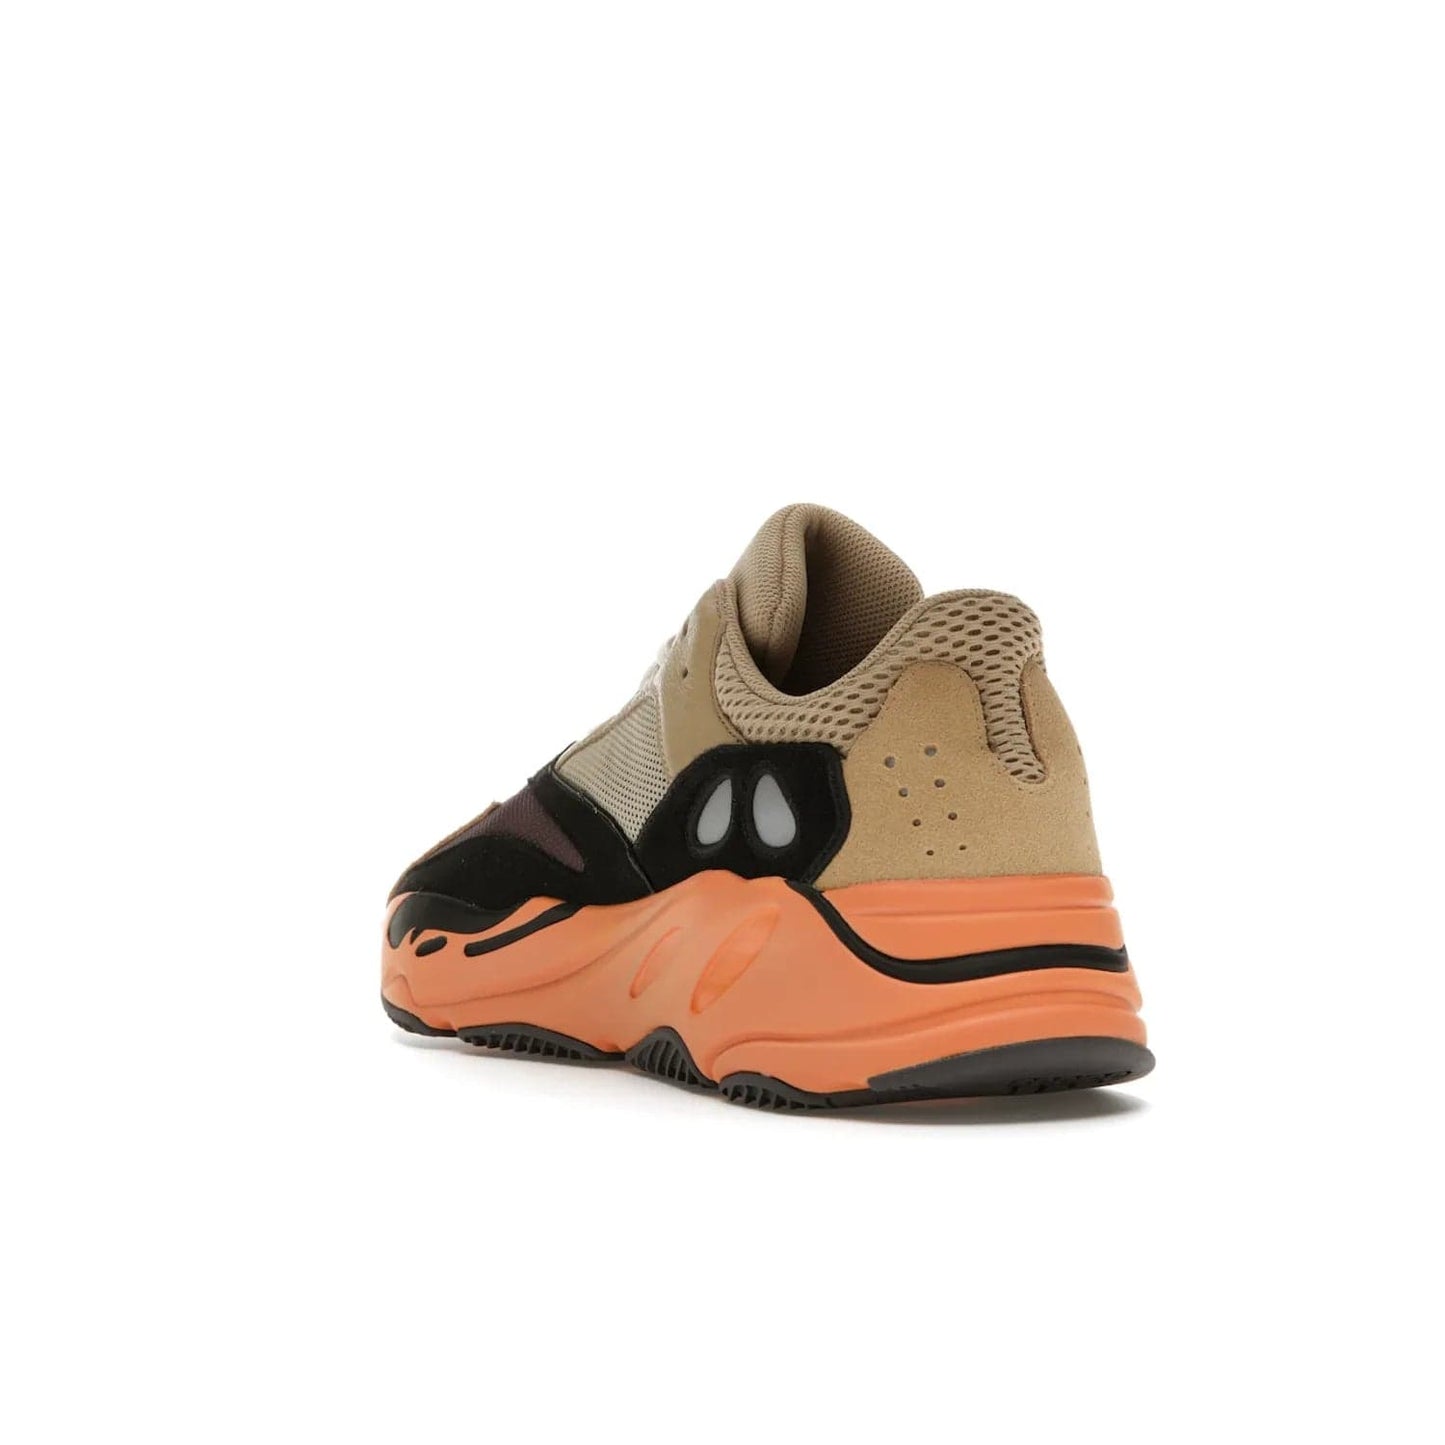 adidas Yeezy Boost 700 Enflame Amber - Image 25 - Only at www.BallersClubKickz.com - Adidas Yeezy Boost 700 Enflame Amber: Eye-catching design with pale yellow, brown, teal, and orange! Get yours in June 2021.